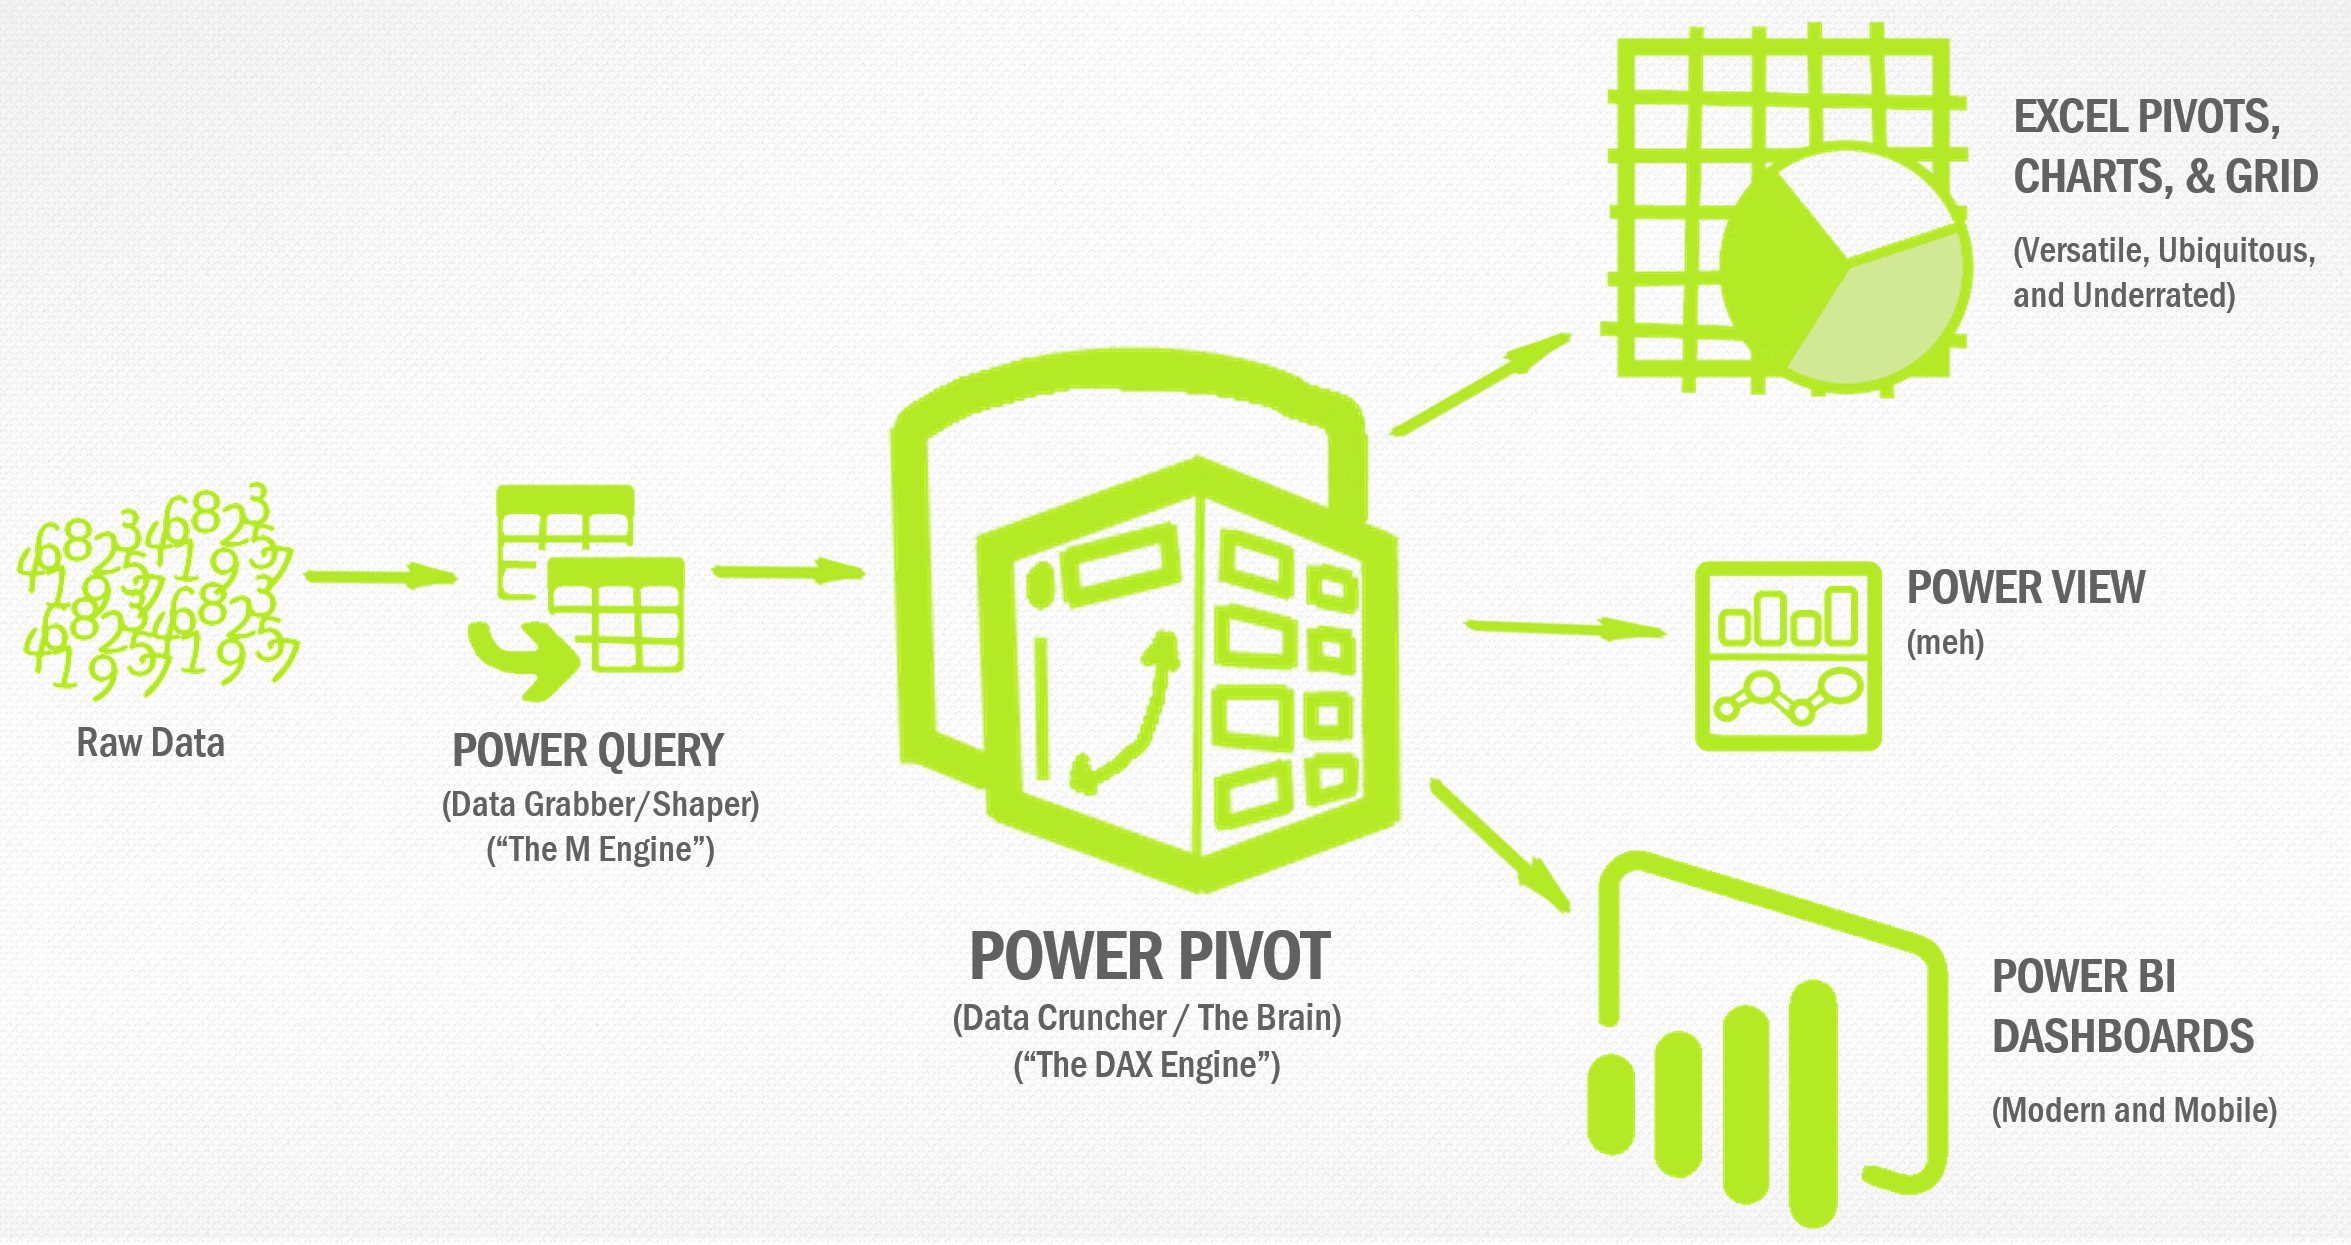 Powered номер. Power query. Power query и Power Pivot. Эксель query. Power query значок.